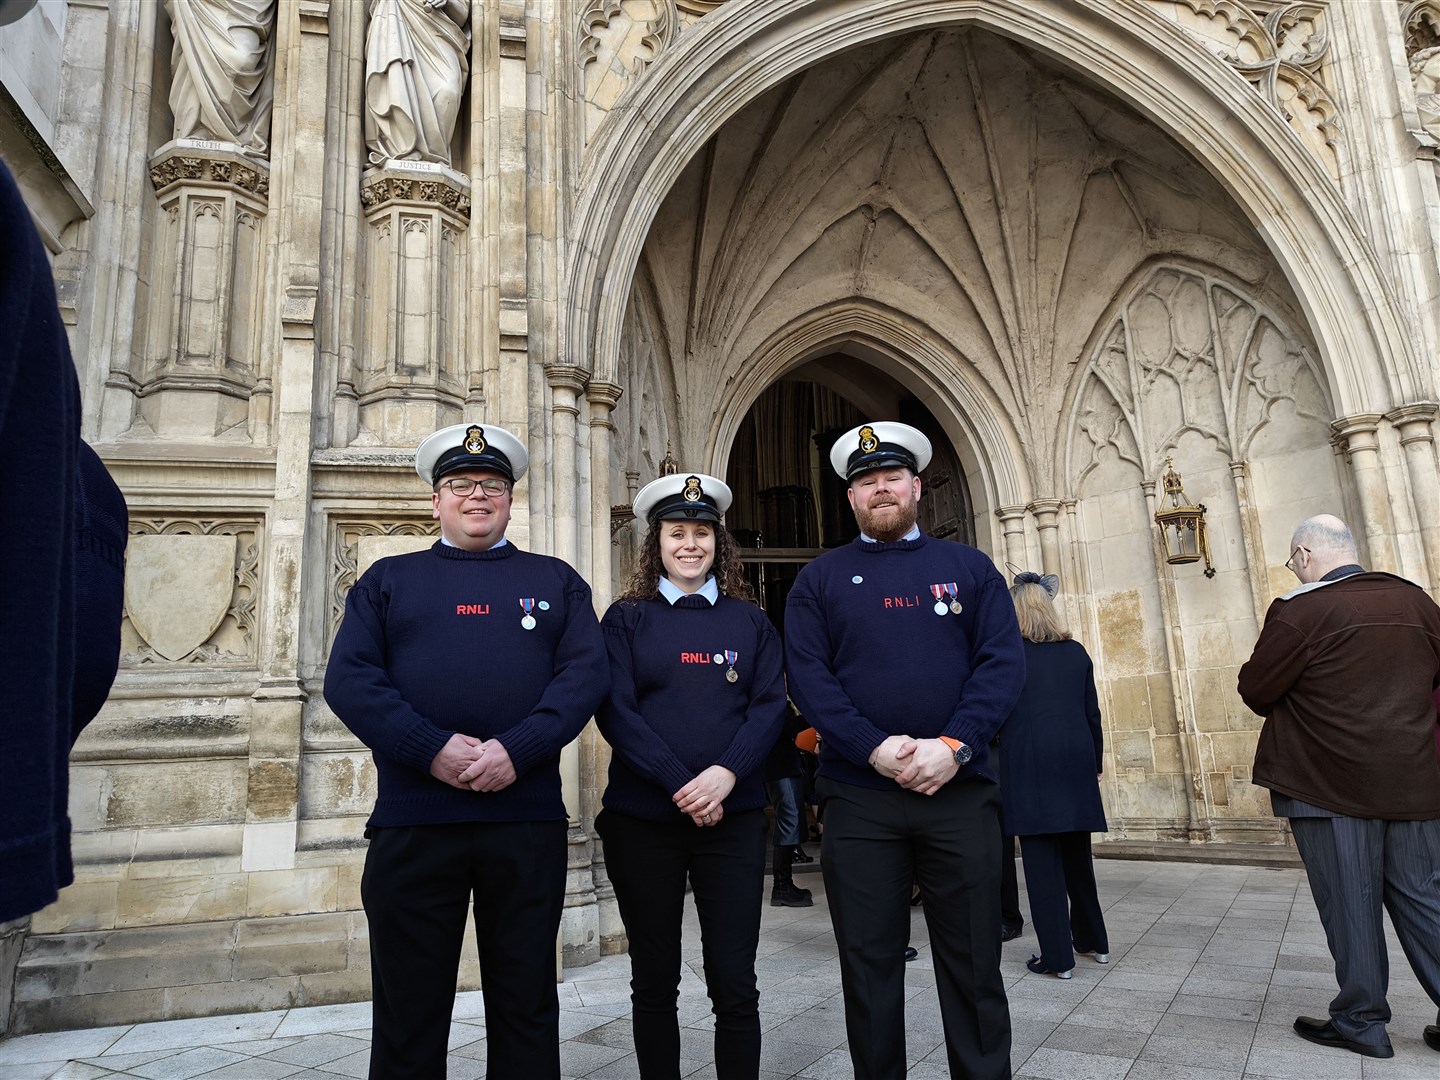 Kyle RNLI volunteers Andrew MacDonald, Emma Noble and Jonathon Mackinnon, at Westminster Abbey to celebrate 200 years of the RNLI.